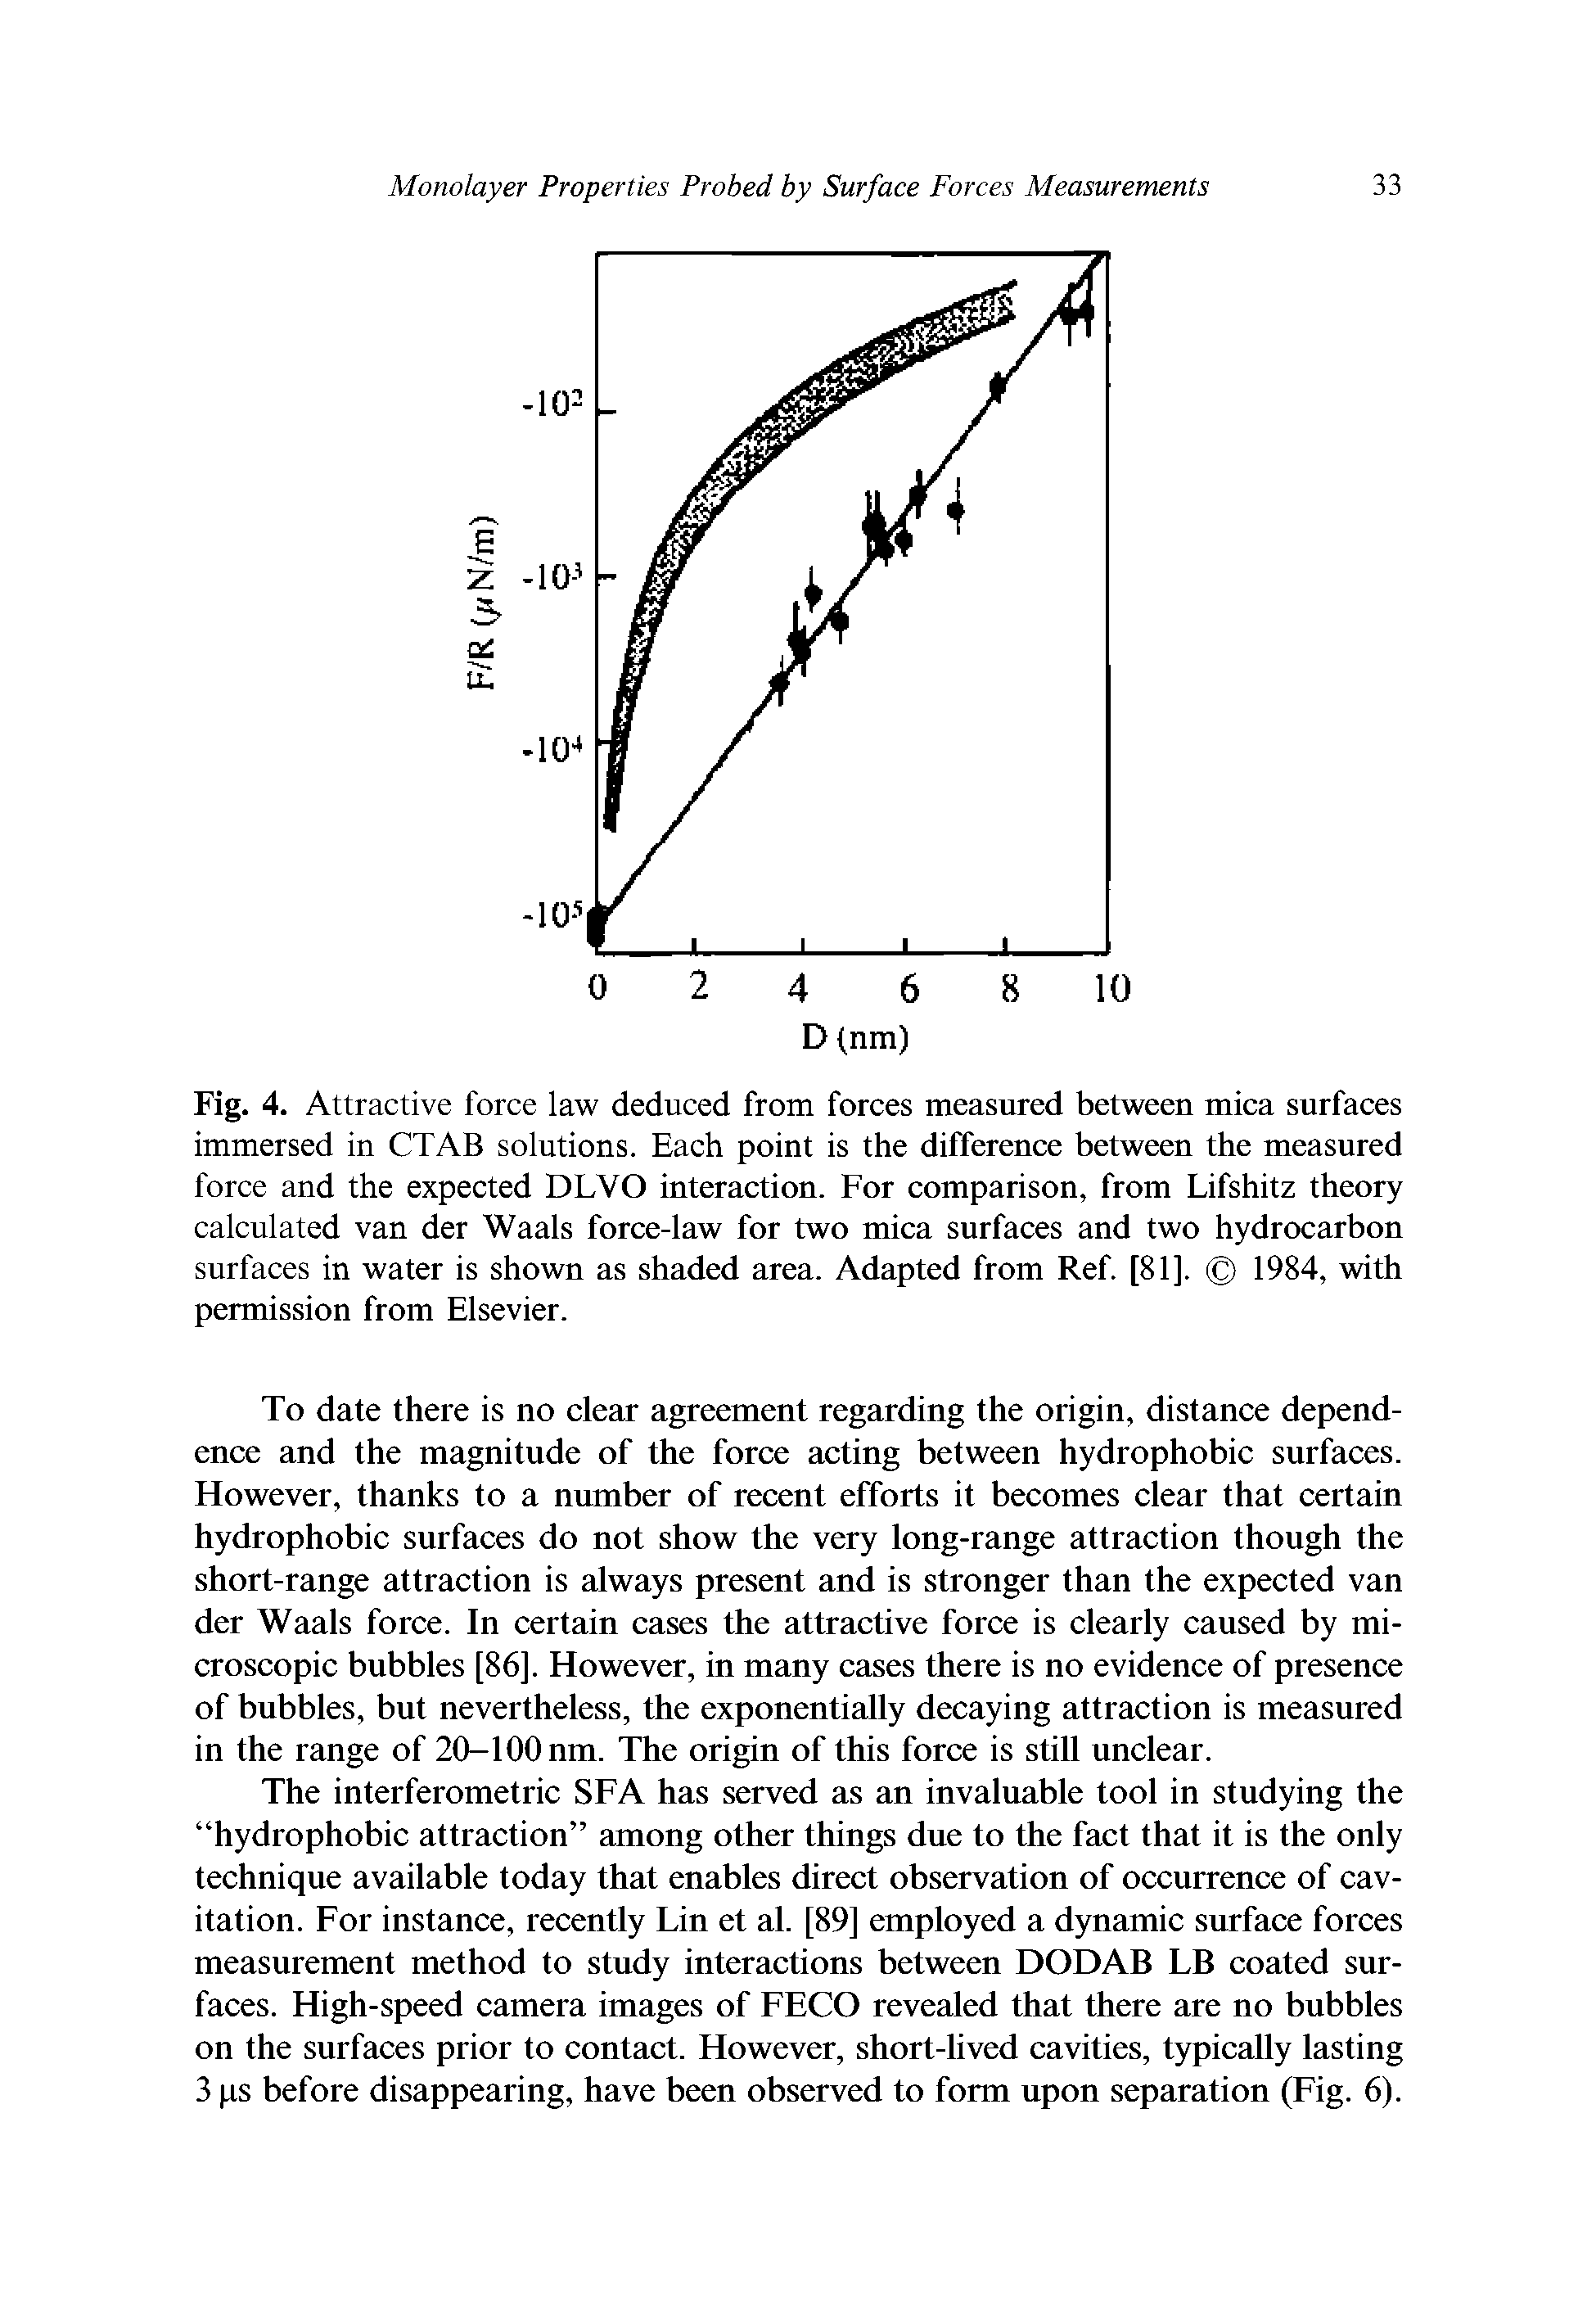 Fig. 4. Attractive force law deduced from forces measured between mica surfaces immersed in CTAB solutions. Each point is the difference between the measured force and the expected DLVO interaction. For comparison, from Lifshitz theory calculated van der Waals force-law for two mica surfaces and two hydrocarbon surfaces in water is shown as shaded area. Adapted from Ref. [81]. 1984, with permission from Elsevier.